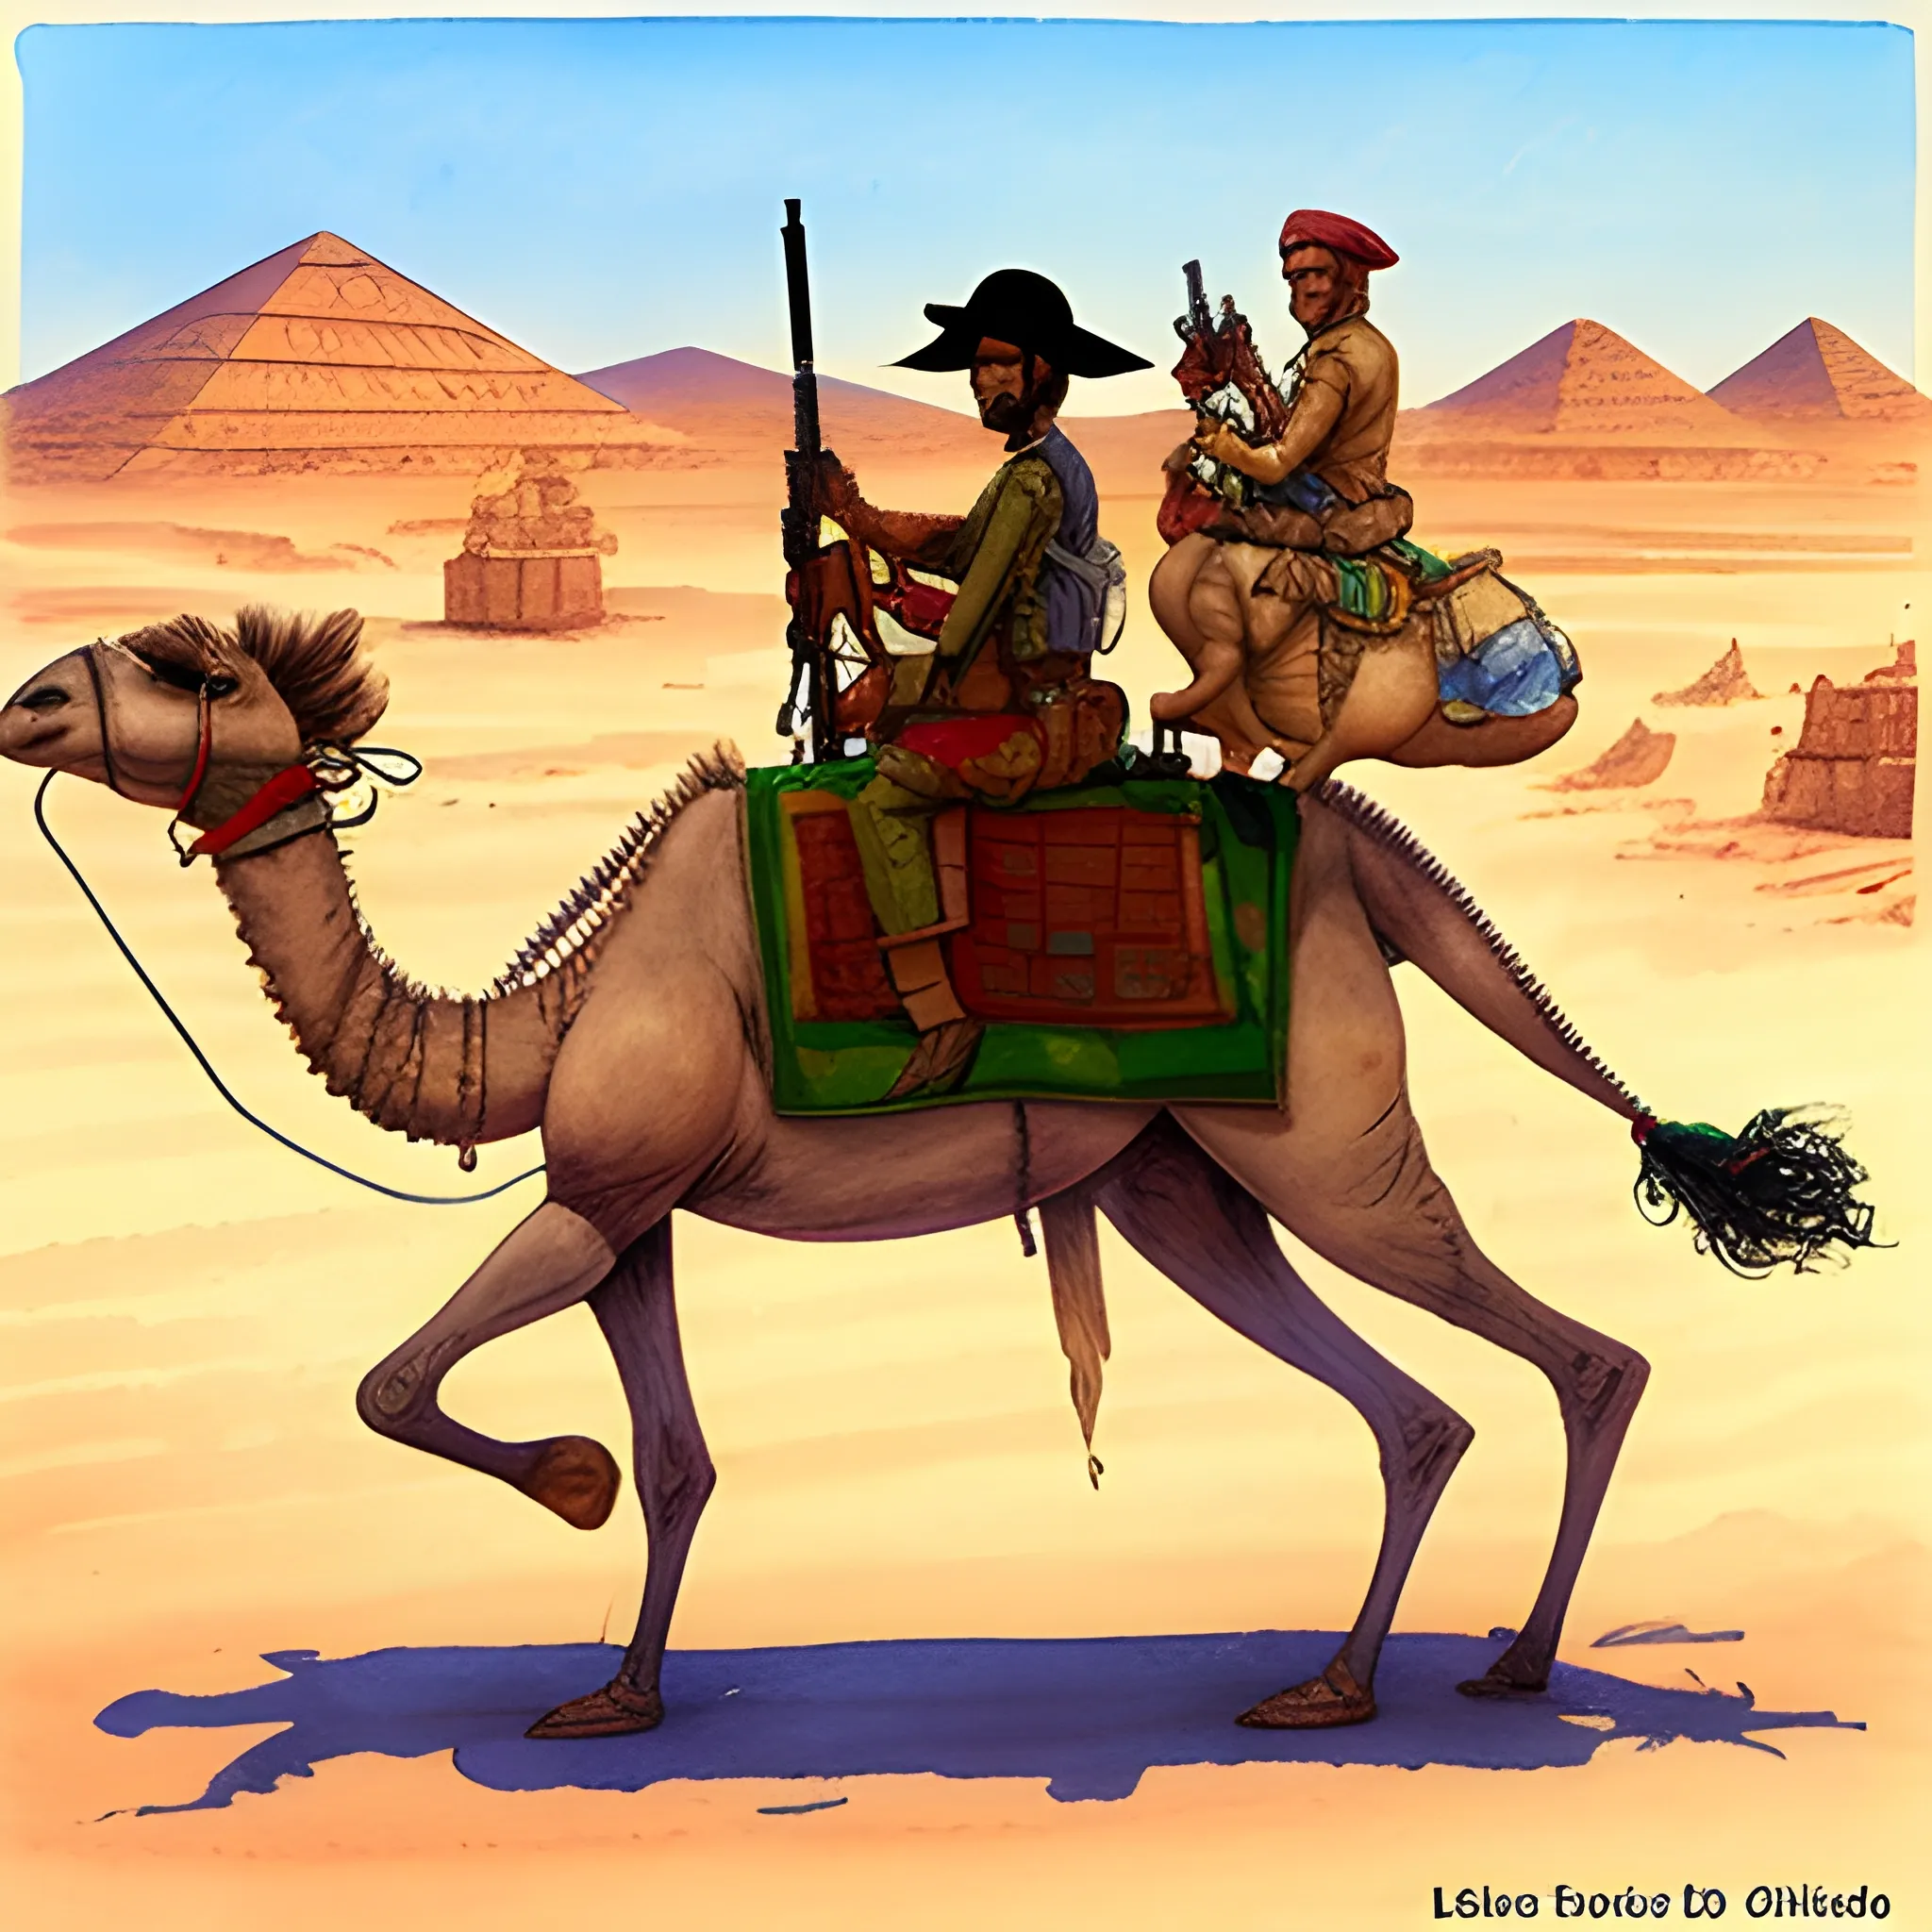 Yemen raider on camel with rifle, drawn Jean Giraud's art style, Cartoon, Pencil Sketch, Water Color, Oil Painting